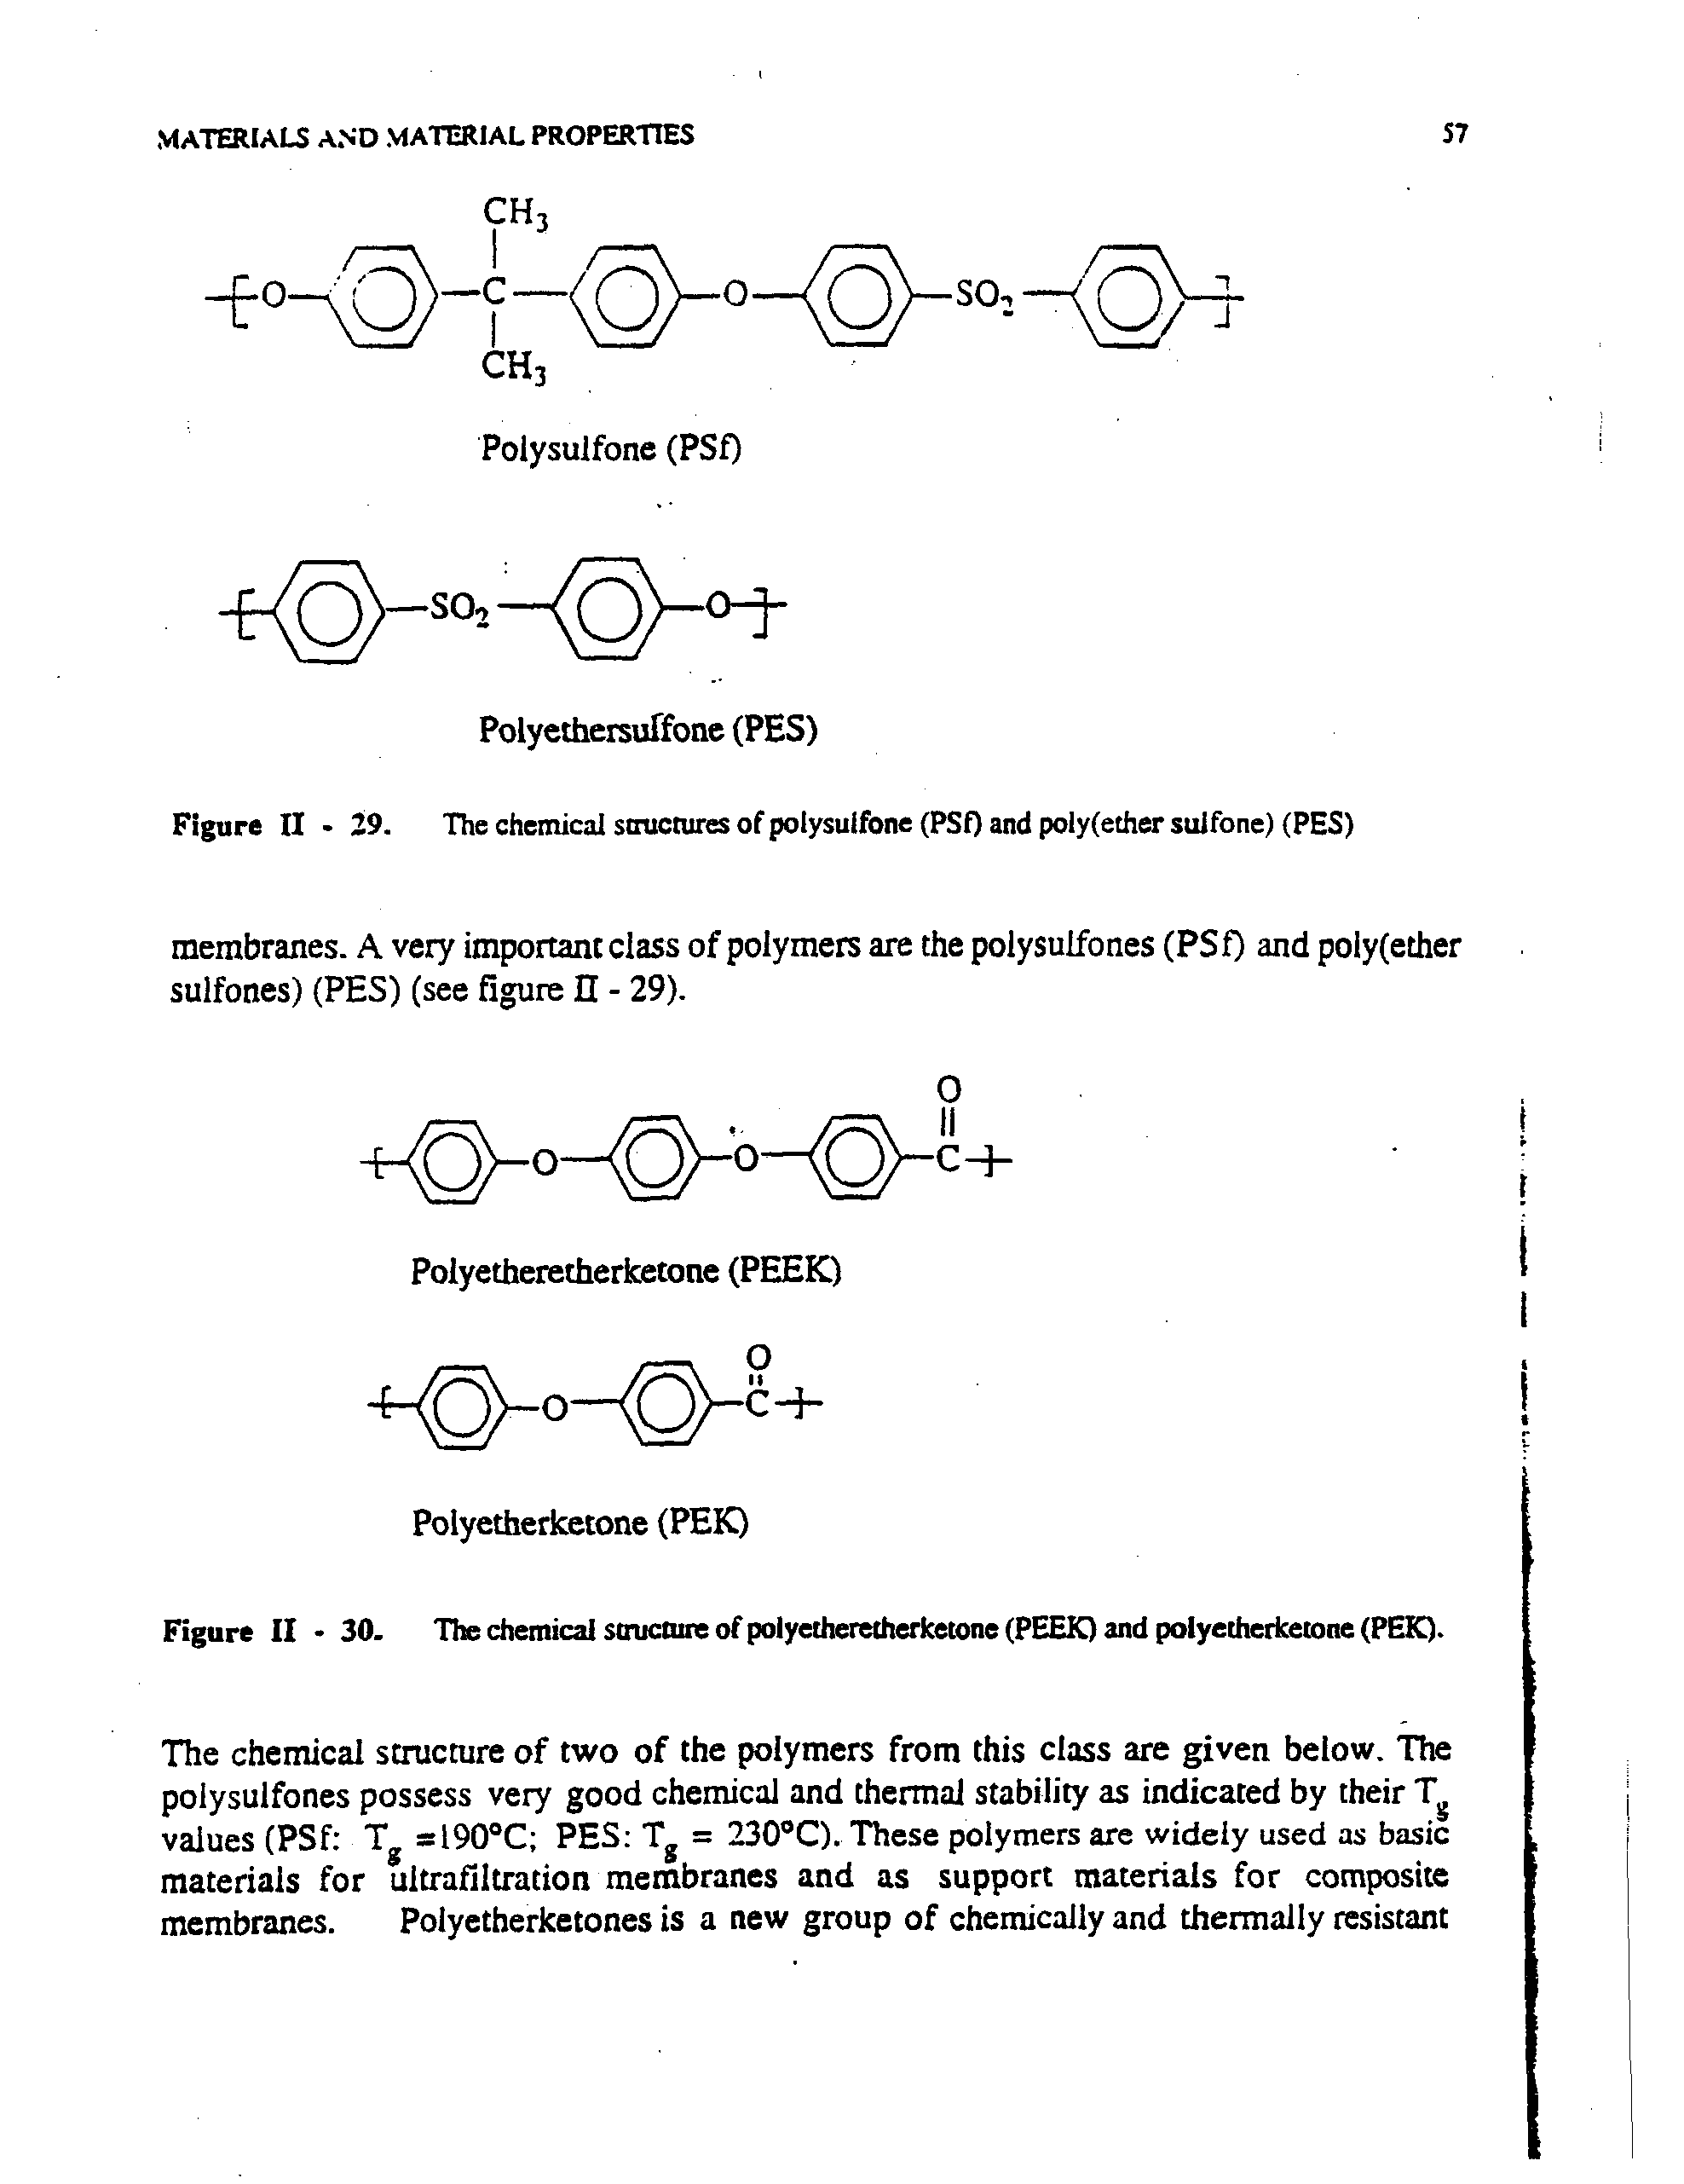 Figure II i9. The chemical souctures of polysulfone (PSf) and poly(ether sulfone) (PES)...